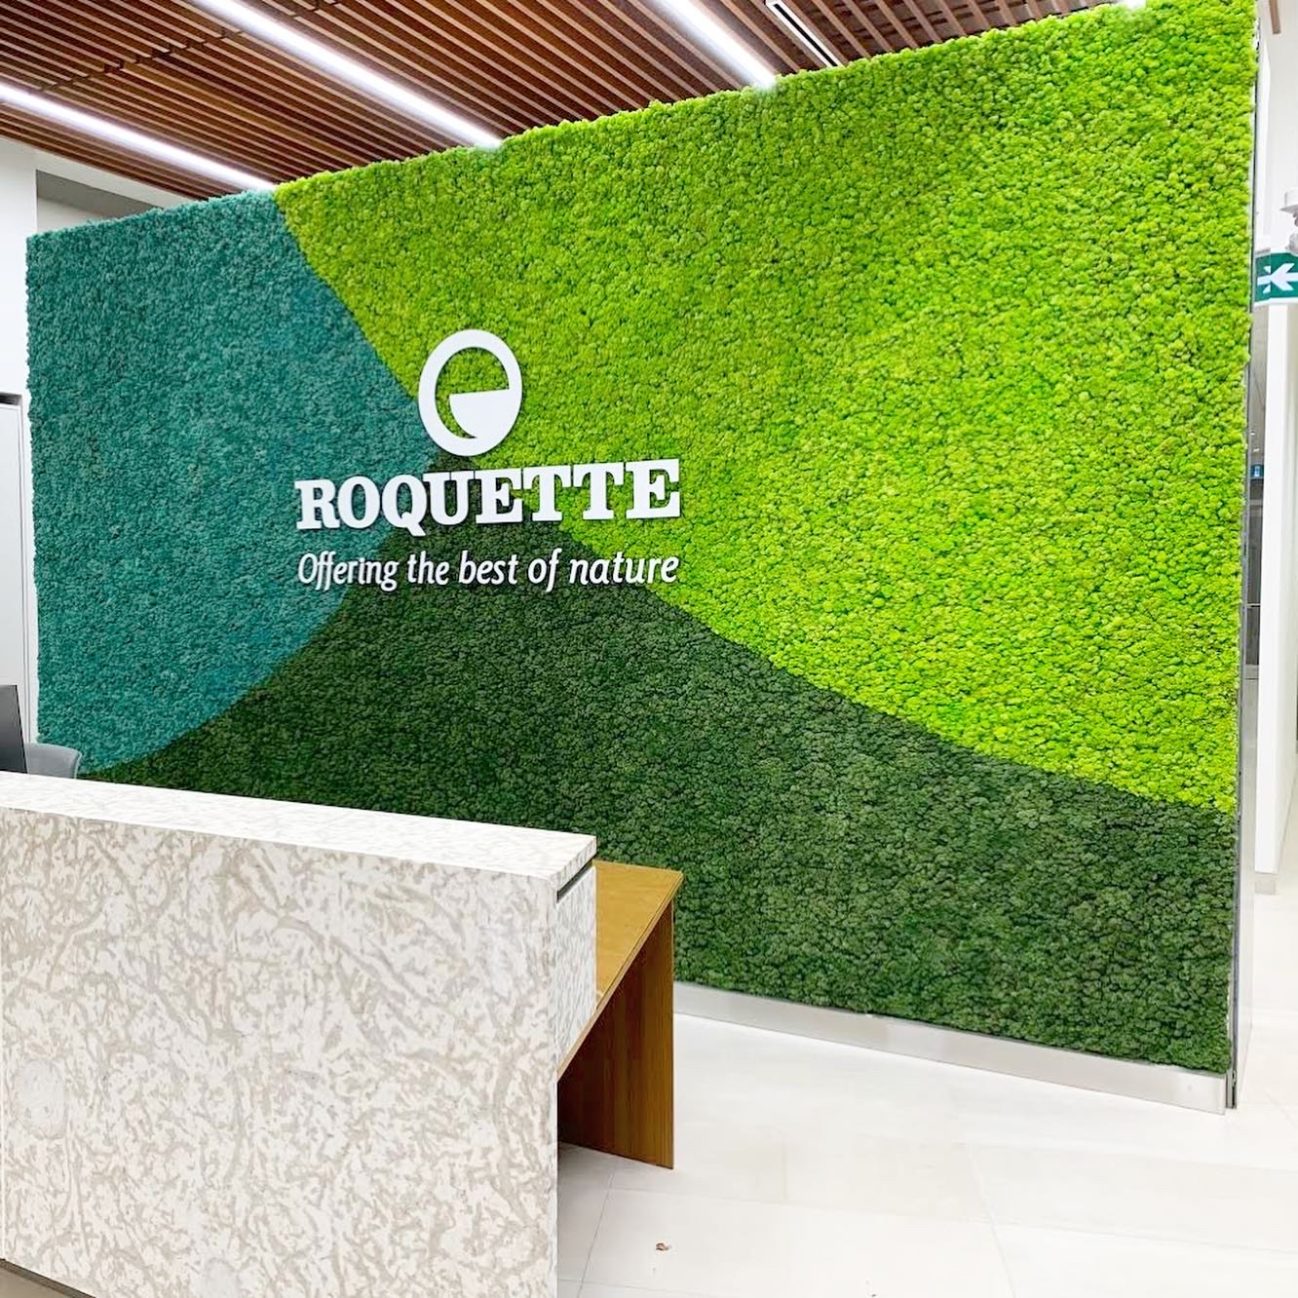 Preserved moss signage for Roquette pea factory